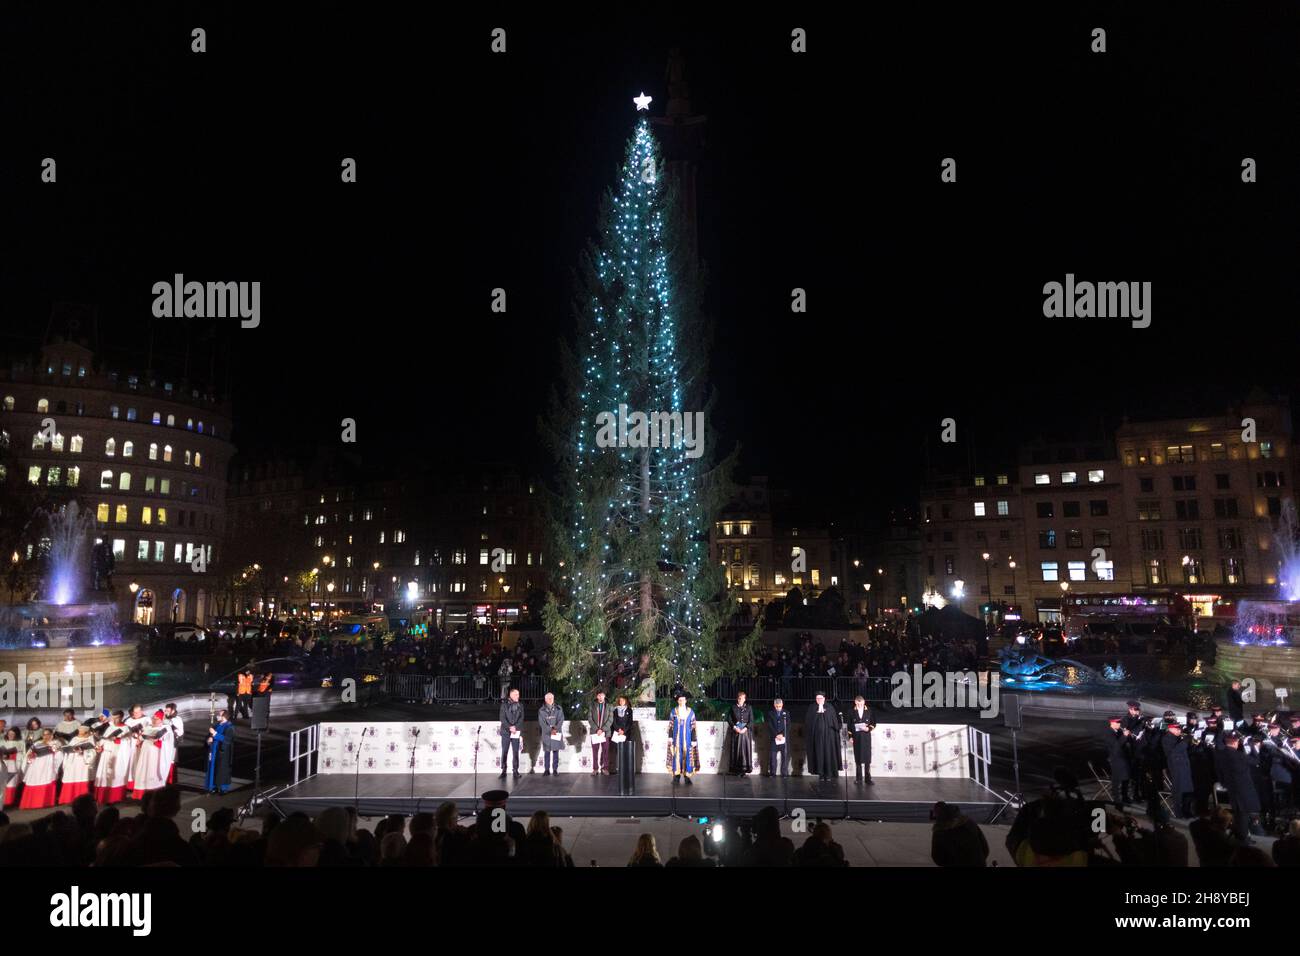 Guests and dignitaries seen singing a hymn on stage, including Mayor of London Sadiq Khan (R4), Lord Mayor of Westminster Councillor Andrew Smith (L3), and Mayor of Oslo Marianne Borgen (R3), during the ceremony.The annual Trafalgar Christmas Tree Ceremony has taken place since the 1947s. A giant Norwegian spruce, standing at 25 meters tall, is gifted by the people of Norway to London in recognition of Britain's support during the Second World War. The Christmas tree is lit up during the ceremony, with choirs and bands performing Christmas Carols. (Photo by Belinda Jiao/SOPA Images/Sipa USA) Stock Photo